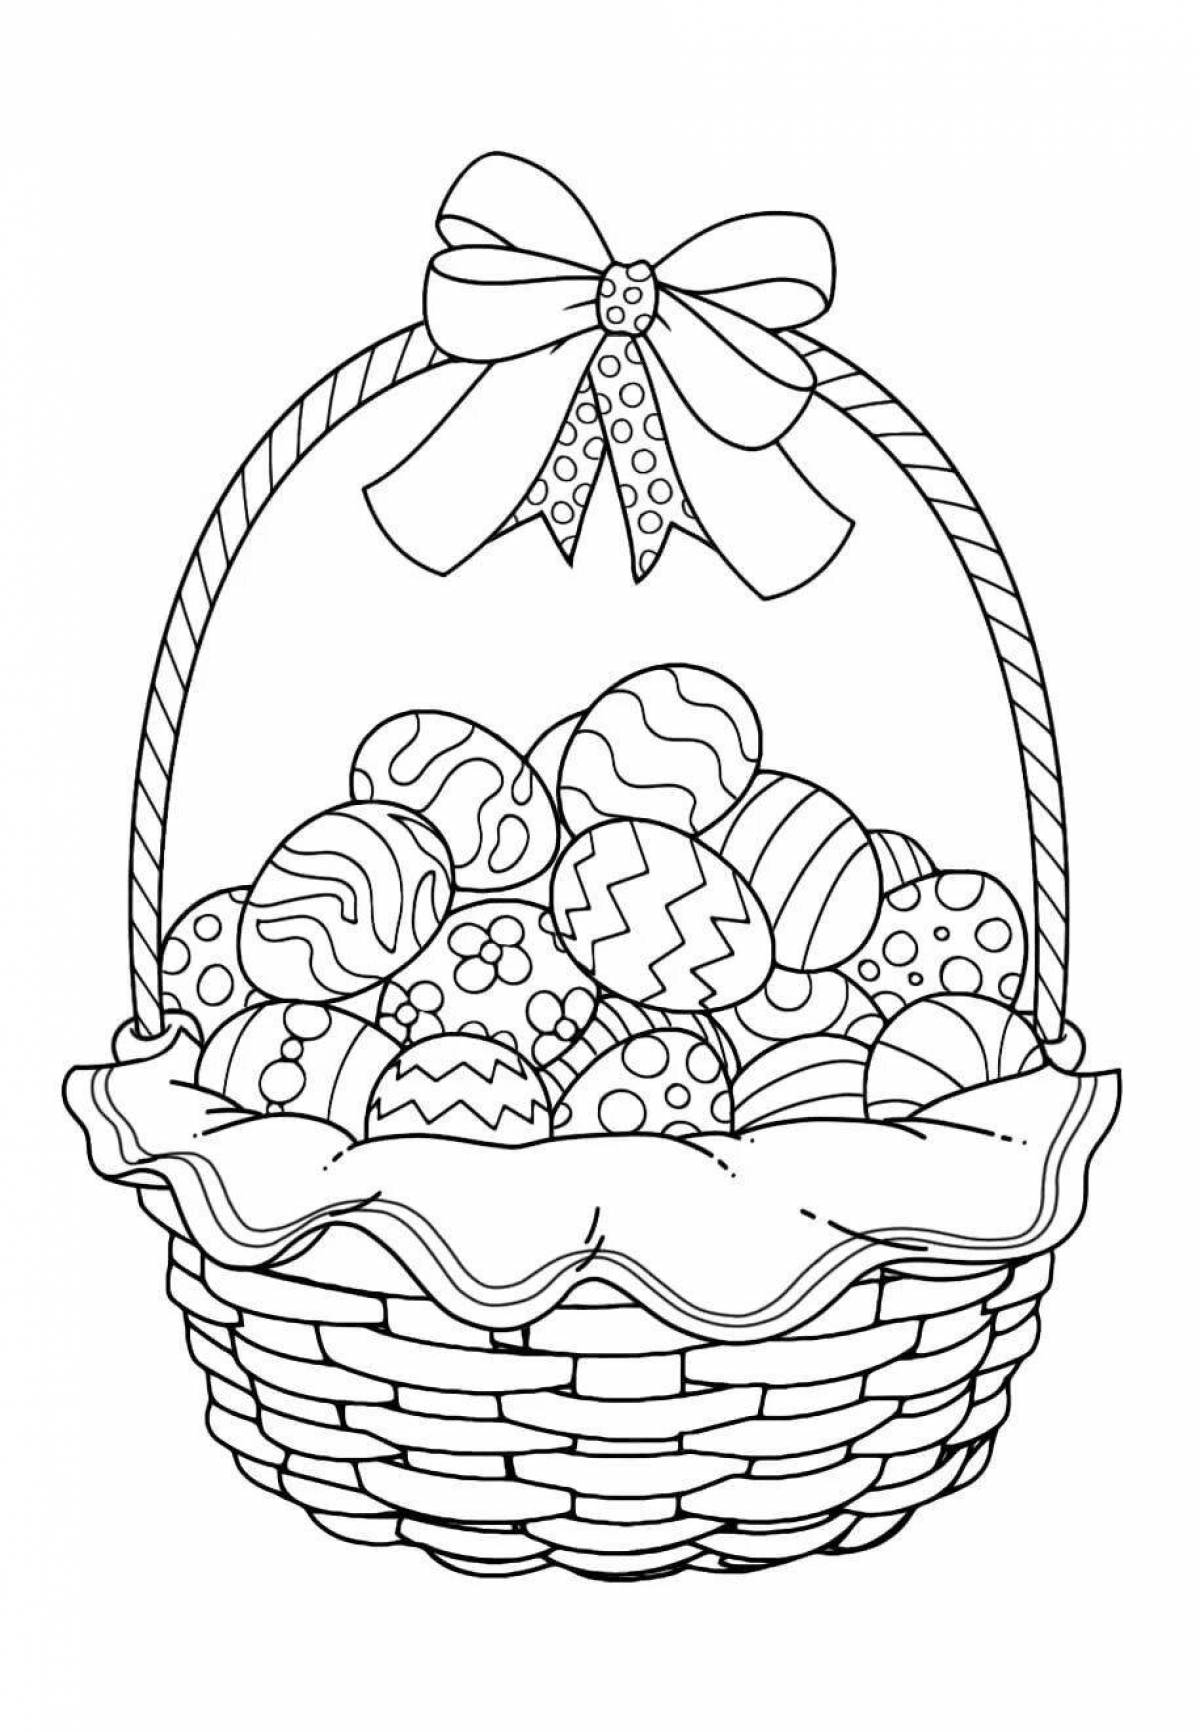 Radiant coloring page easter symbols